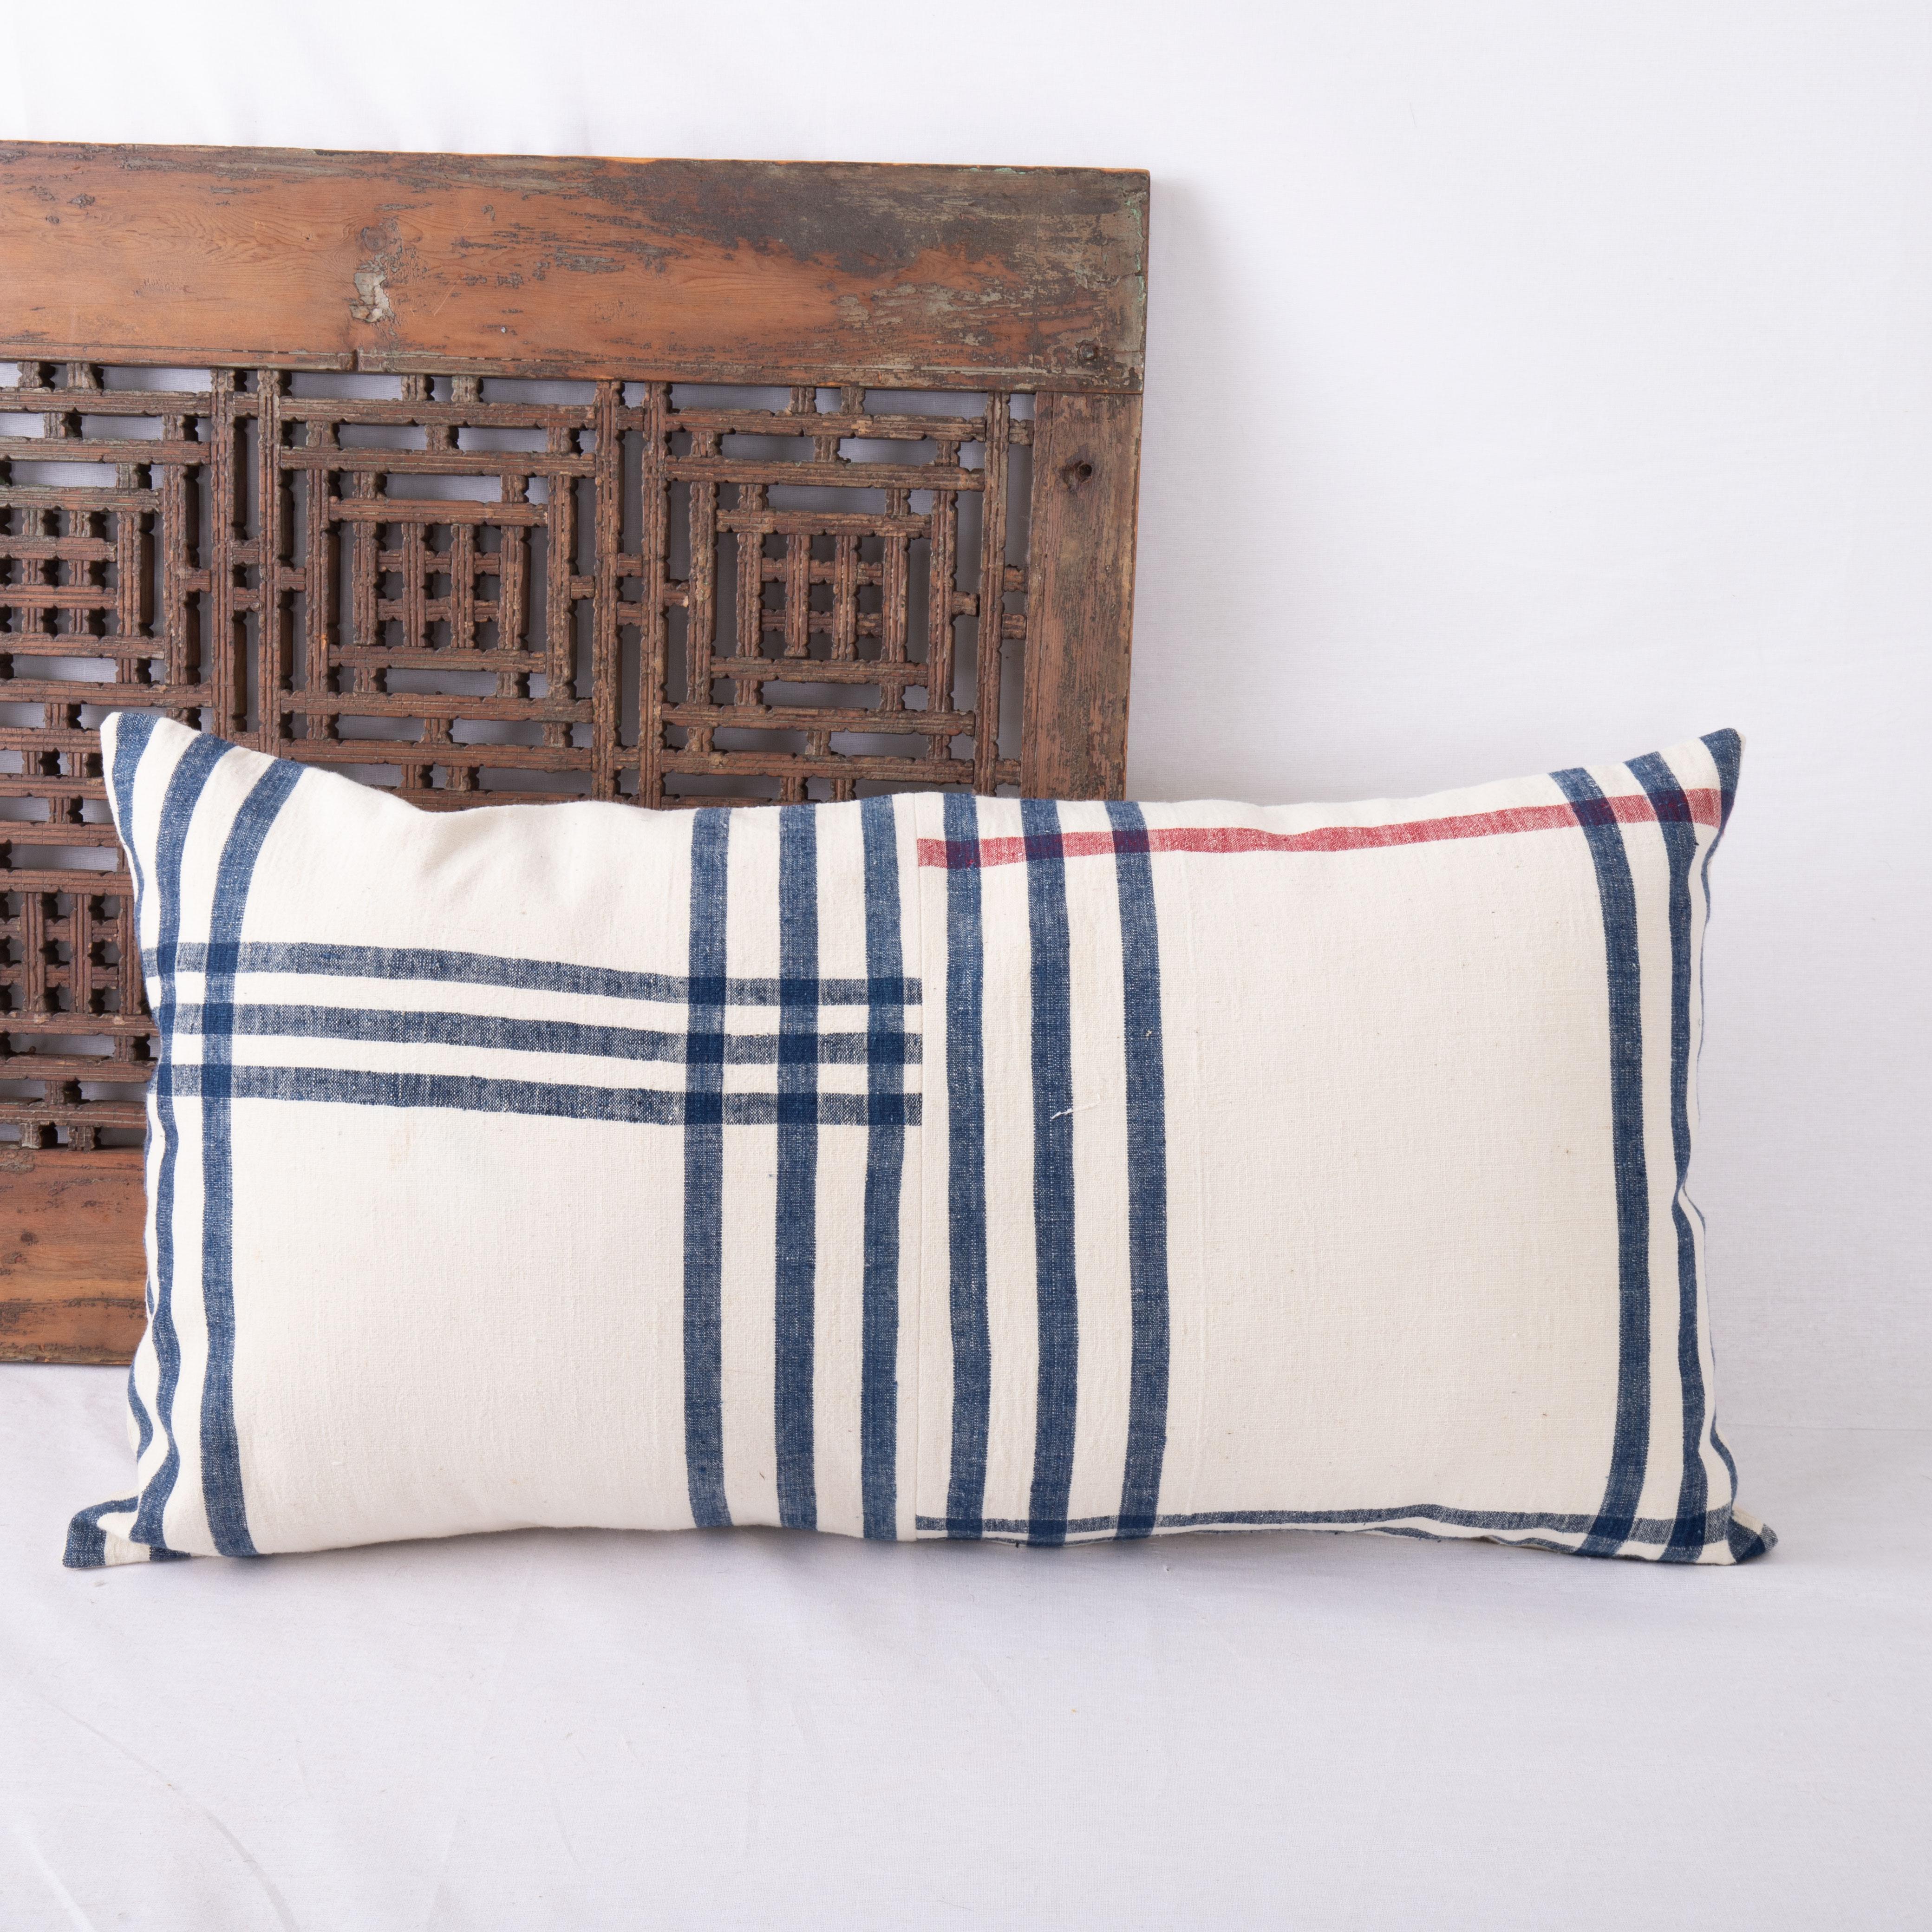 Lumbar Pillow Cover Made from a Vintage Anatolian Cotton Weaving, Mid 20th C. In Good Condition For Sale In Istanbul, TR